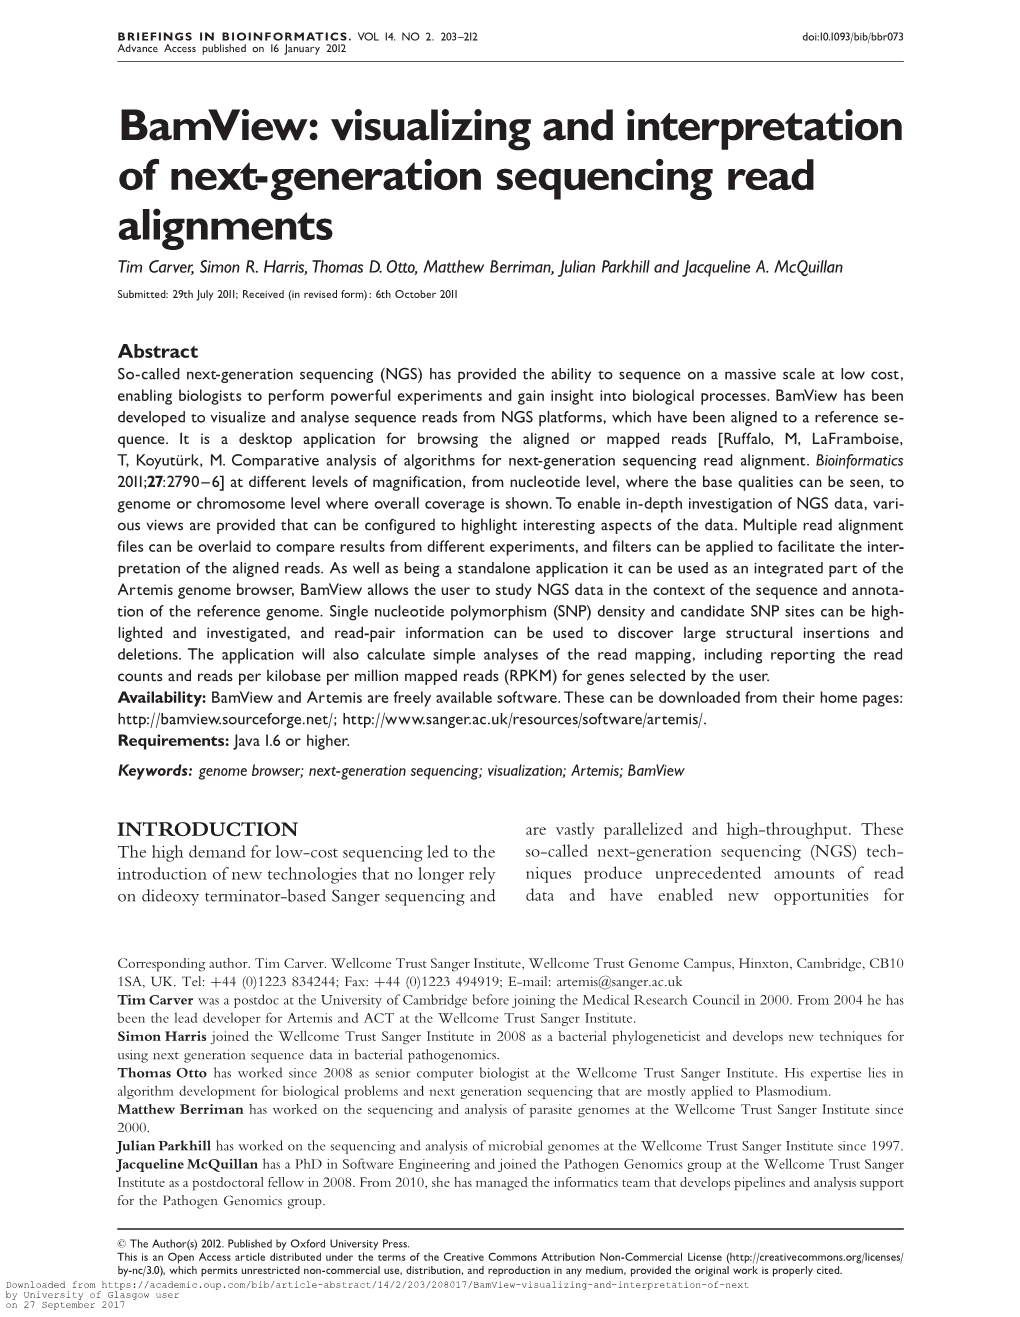 Visualizing and Interpretation of Next-Generation Sequencing Read Alignments Tim Carver, Simon R